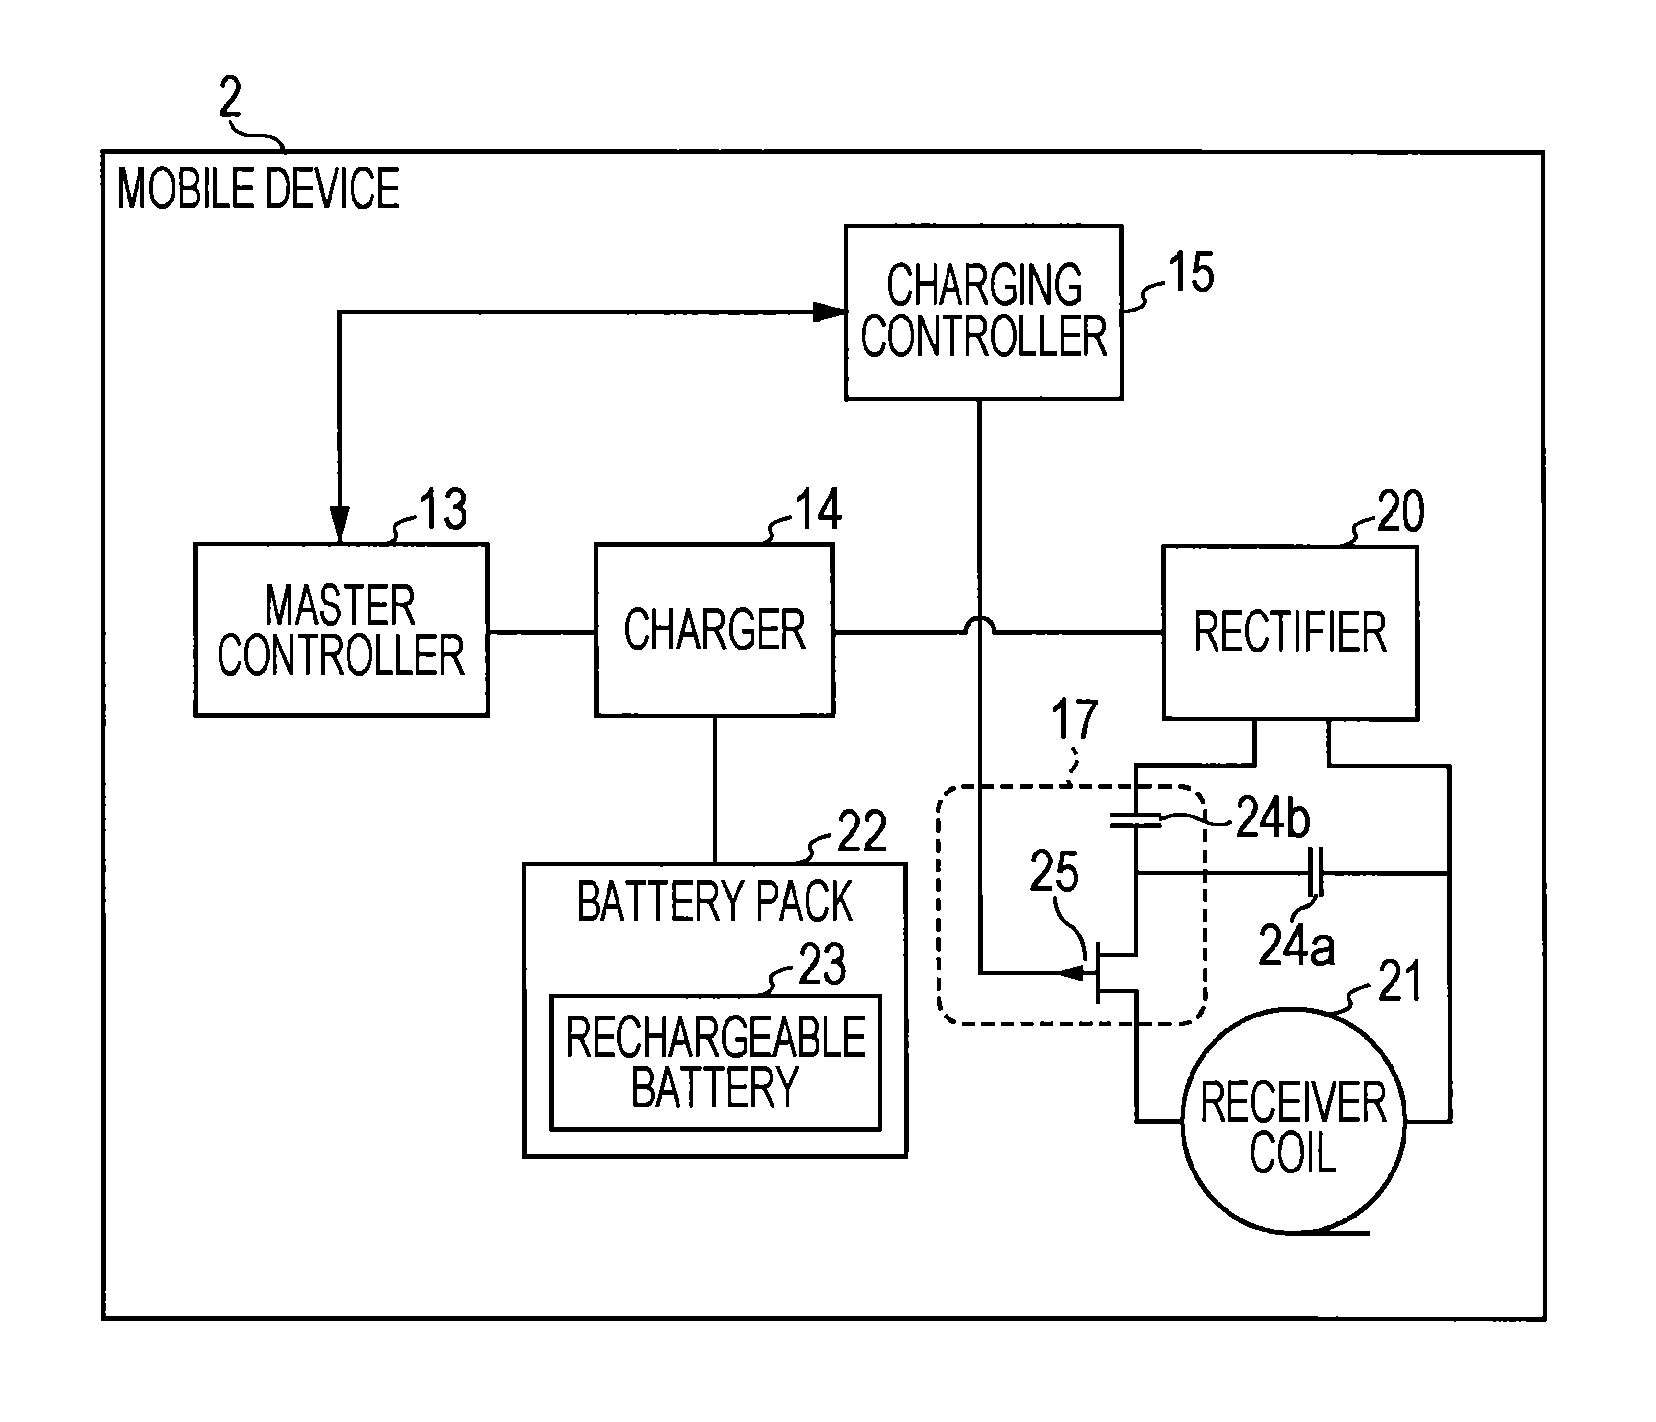 Mobile device and charging apparatus